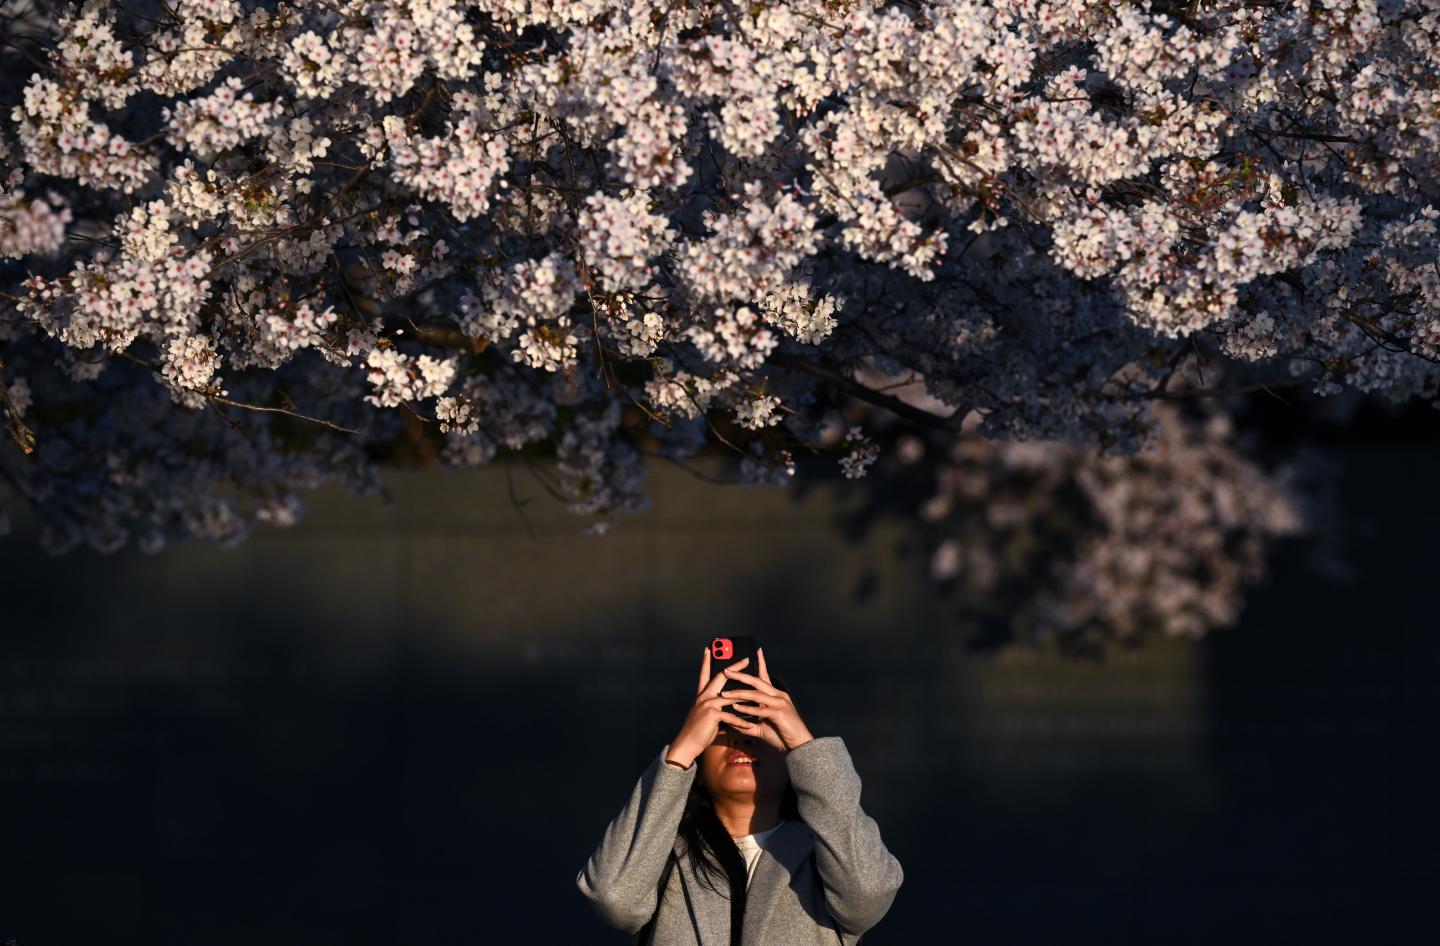 A person holding up their phone to take a picture of a cherry blossom tree